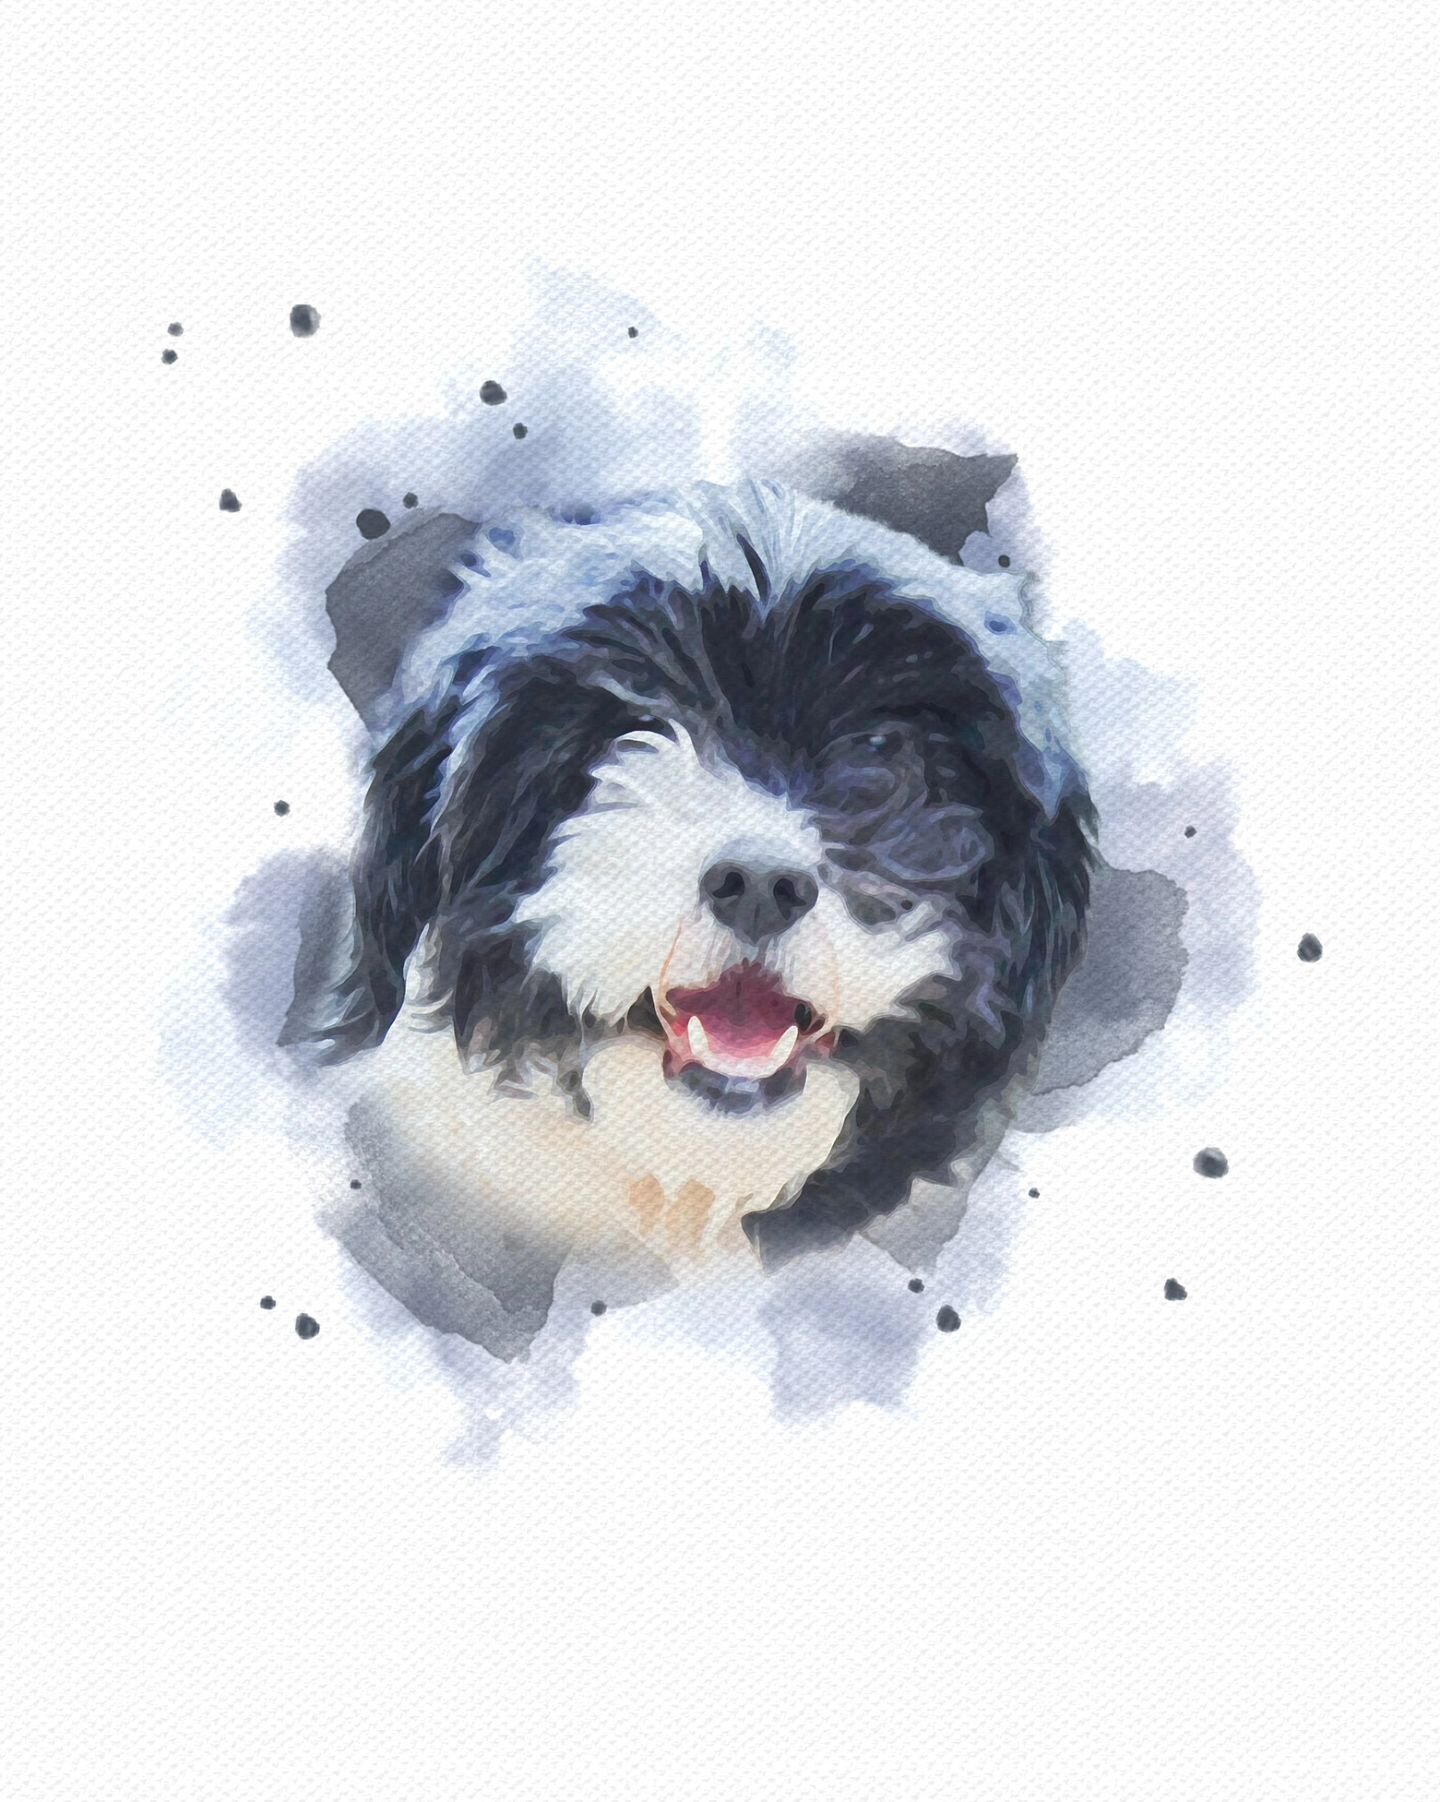 🩶 M A T E R 🖤

RIP handsome lil Mater! We love the quote that went with this memorial portrait as Mater sure looks like a cutie and a fighter until the end 😍

This was another Christmas present and a great example of the photo not needing to be pe